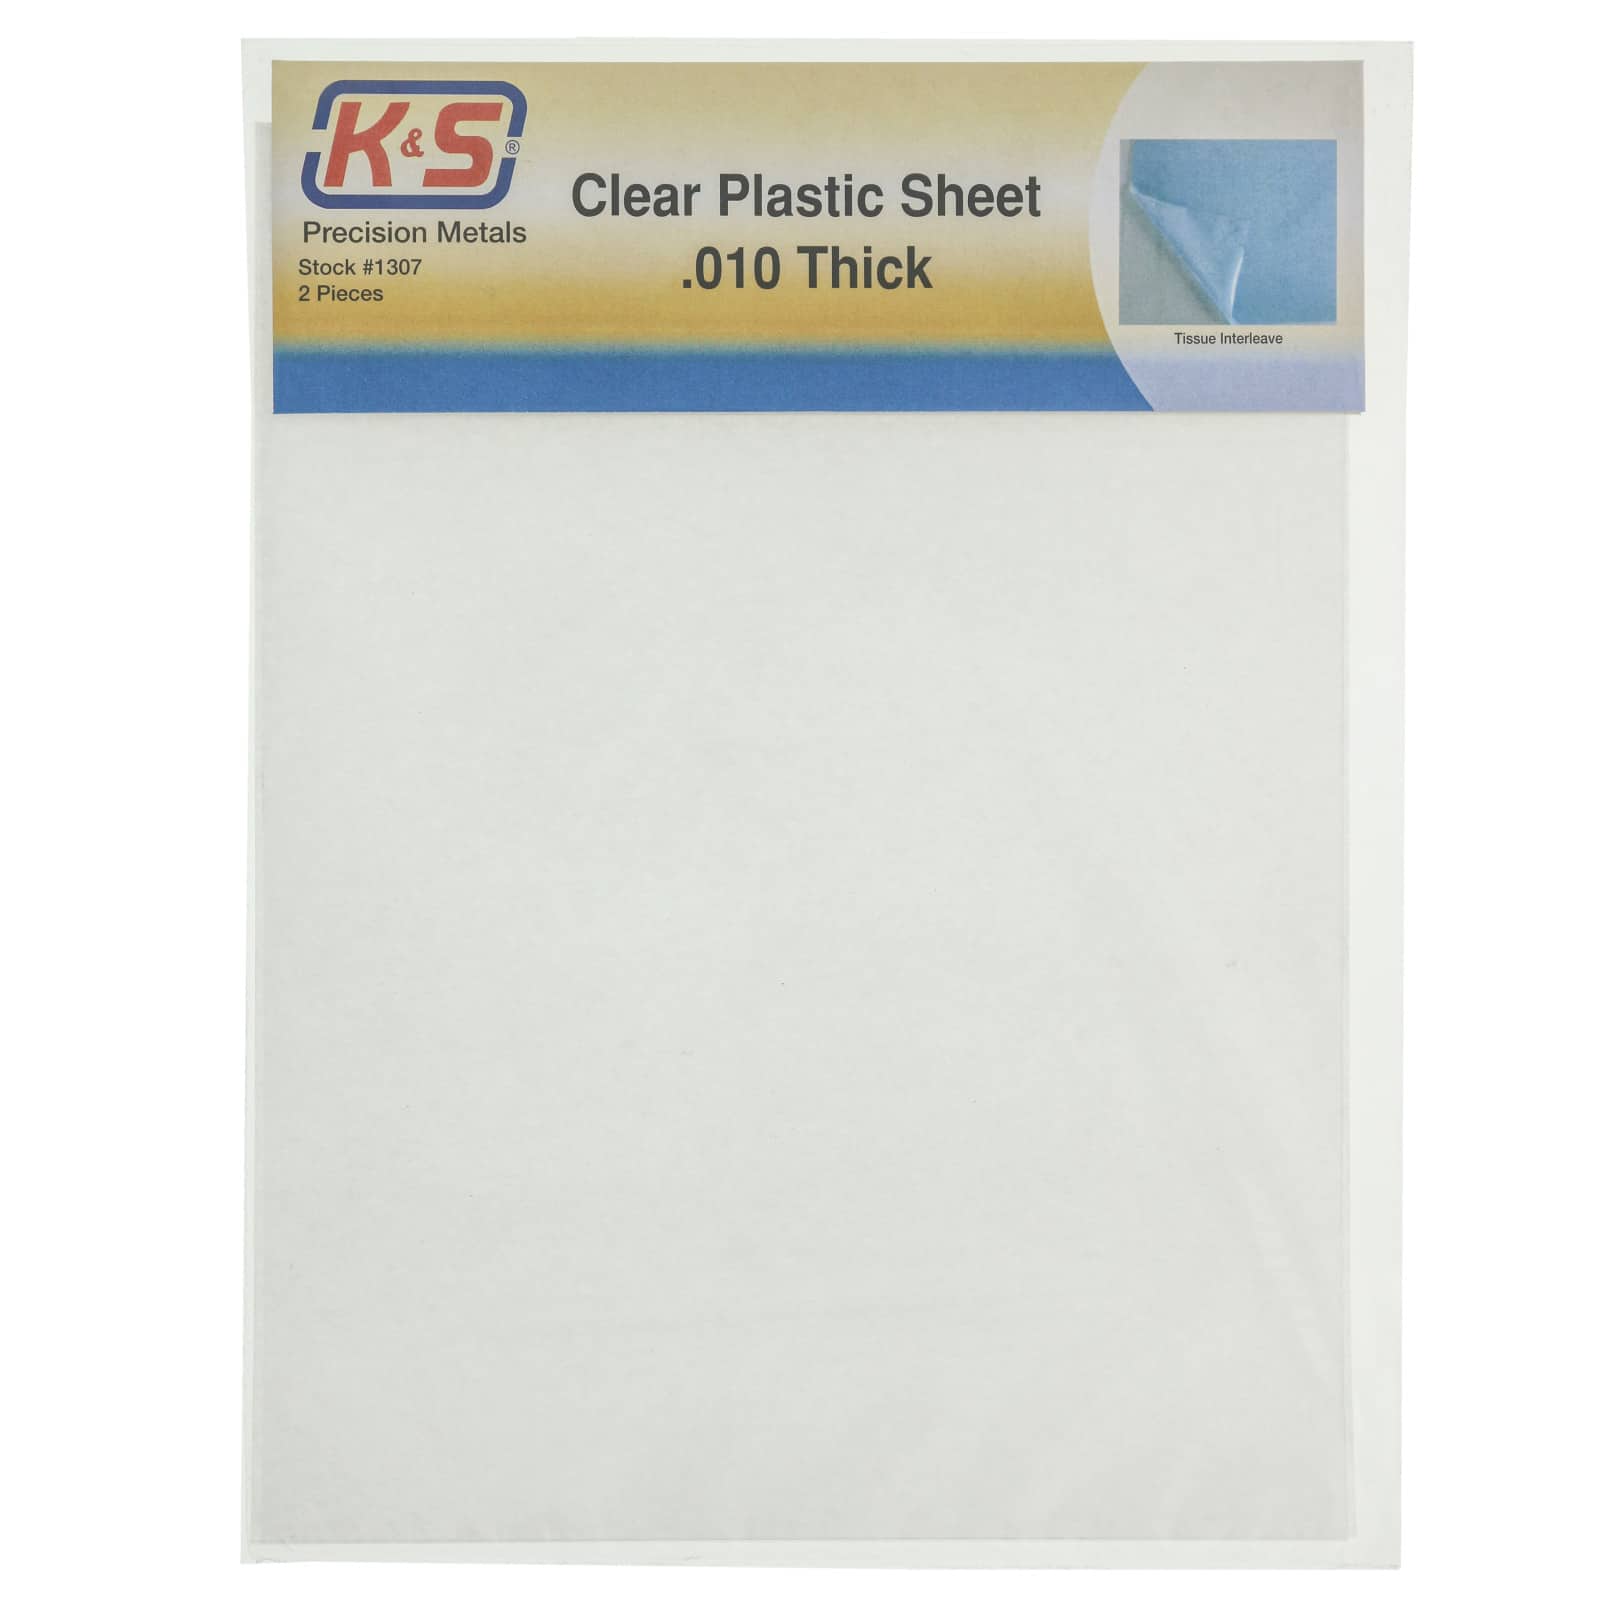 K&S Engineering® 8.5 x 11 Clear Plastic Sheets, 2ct.